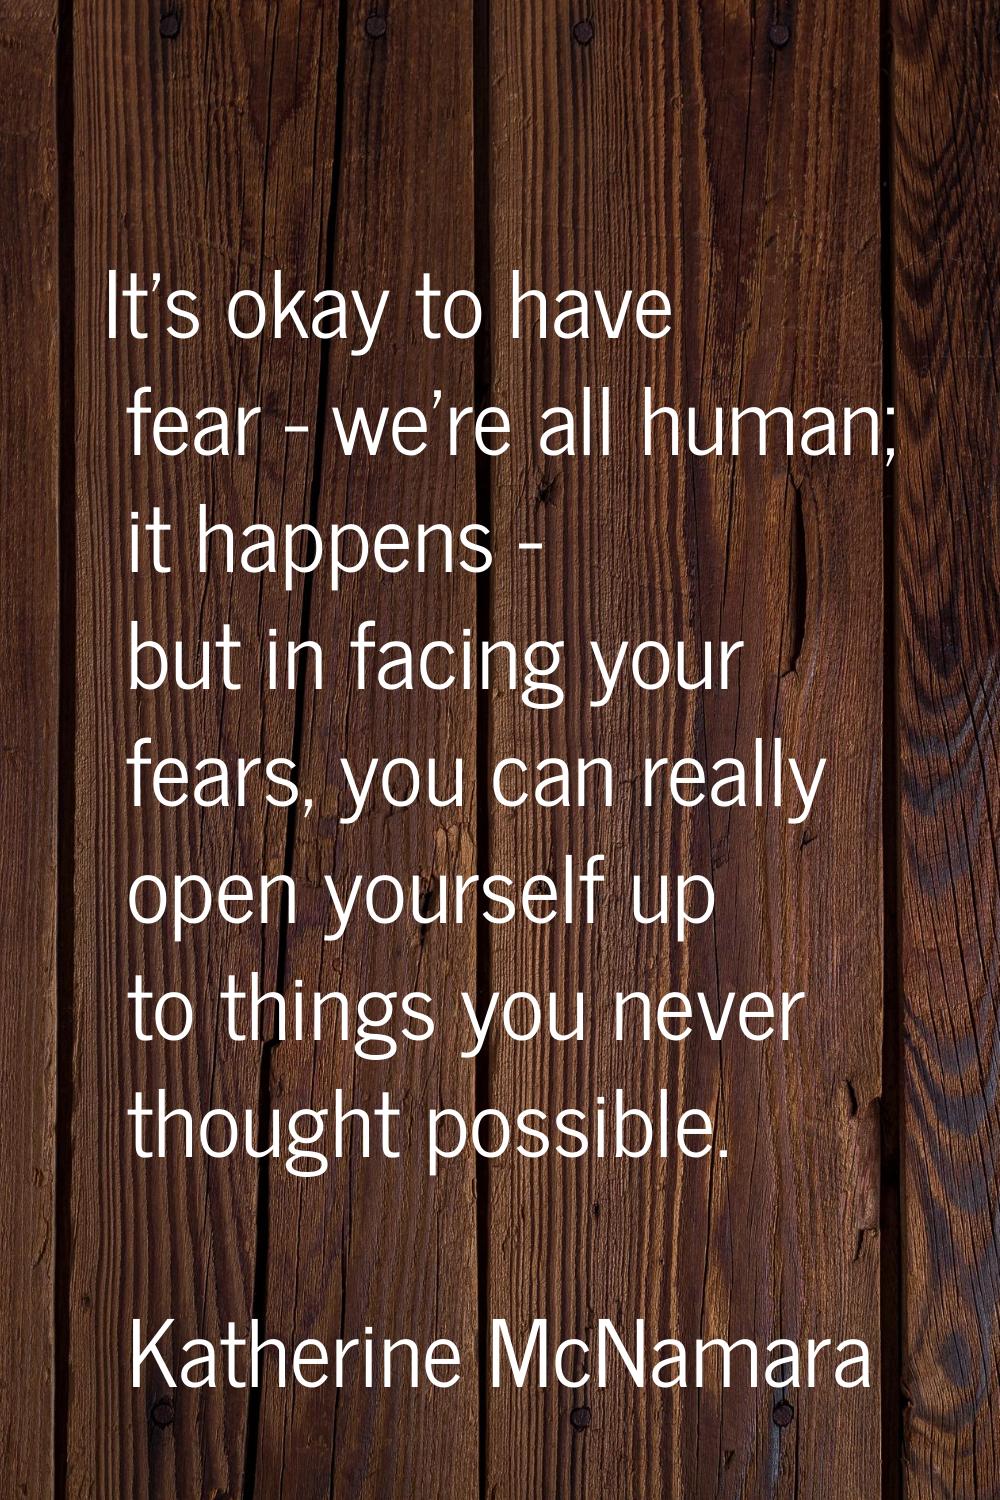 It's okay to have fear - we're all human; it happens - but in facing your fears, you can really ope